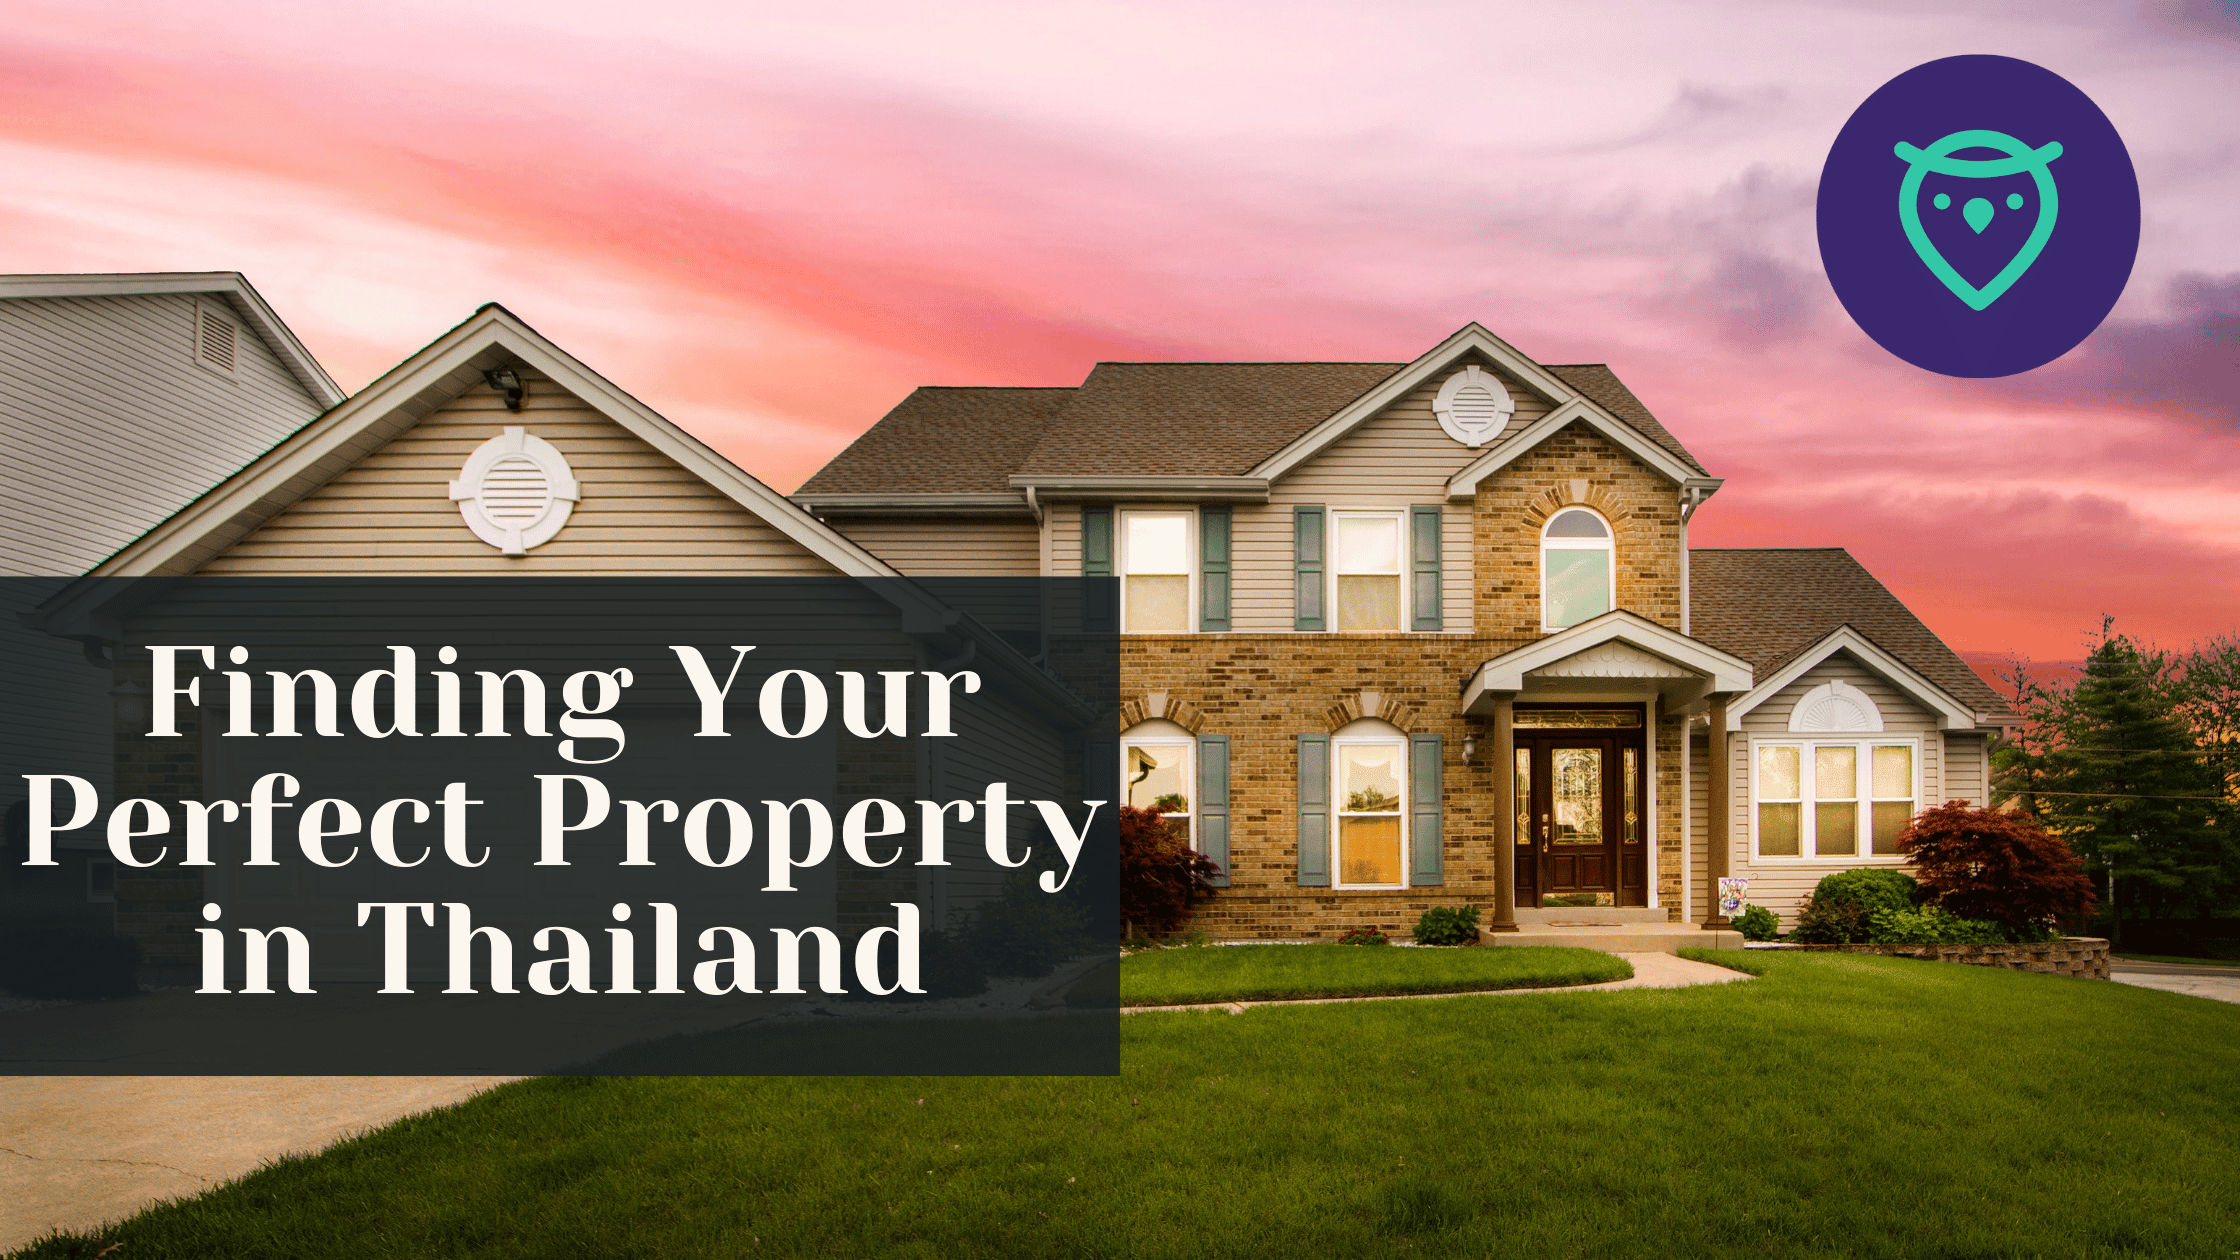 Finding Your Perfect Property in Thailand: A Guide to Using YoohooHomes for an E